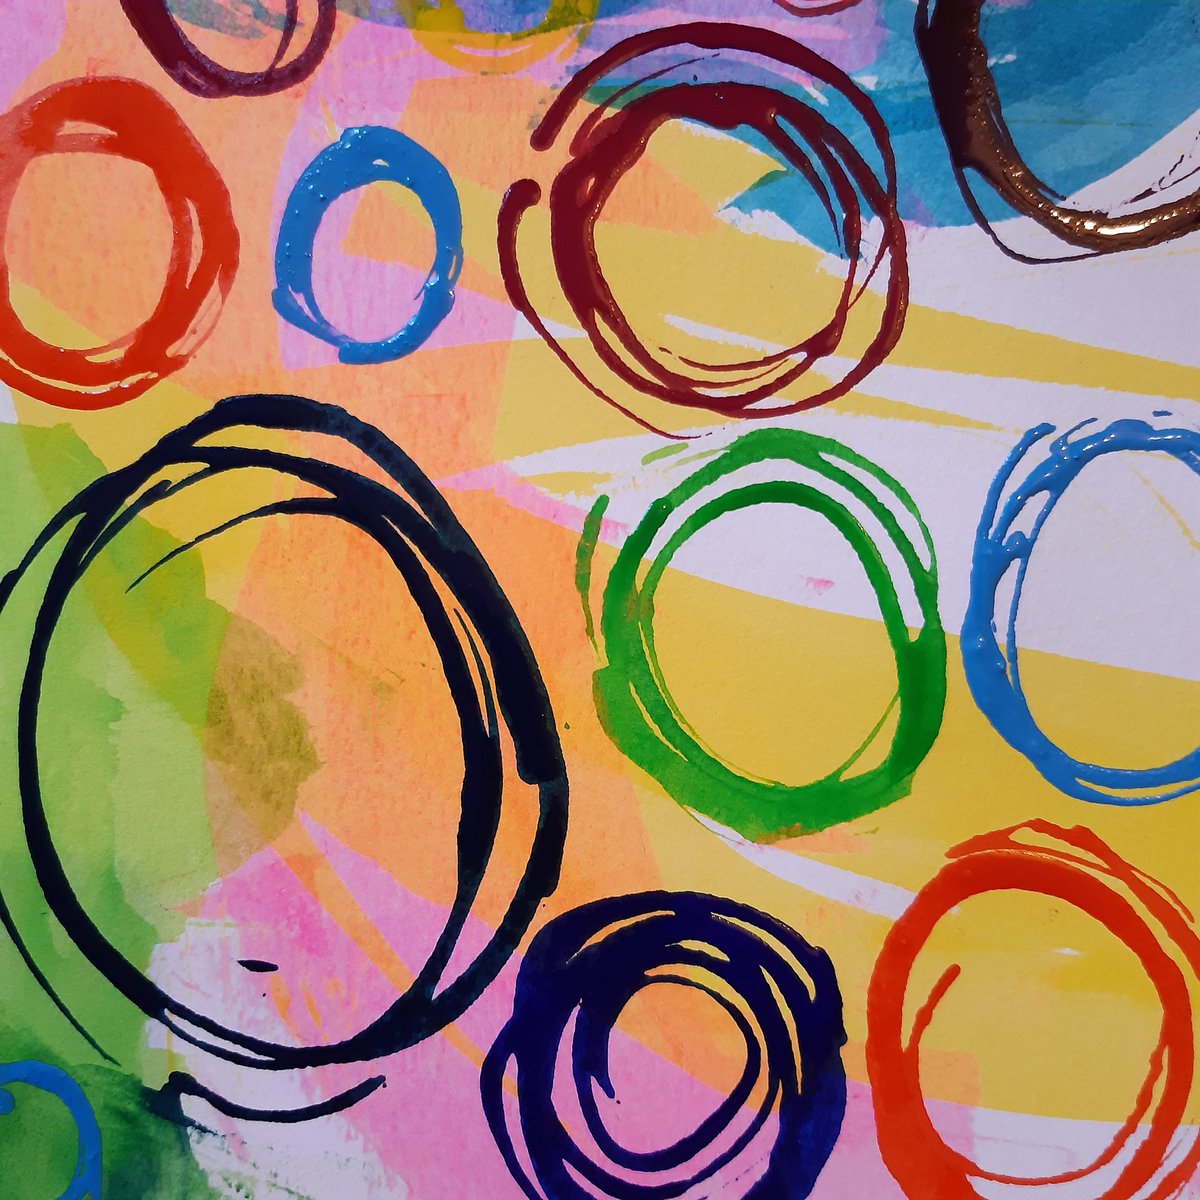 Painting patterns! 

#patternlove #painting #abstract #abstractart #abstractexpressionism #sketchbook #creating #colourpop #colourful #multicoloured #circles #circular #size3art